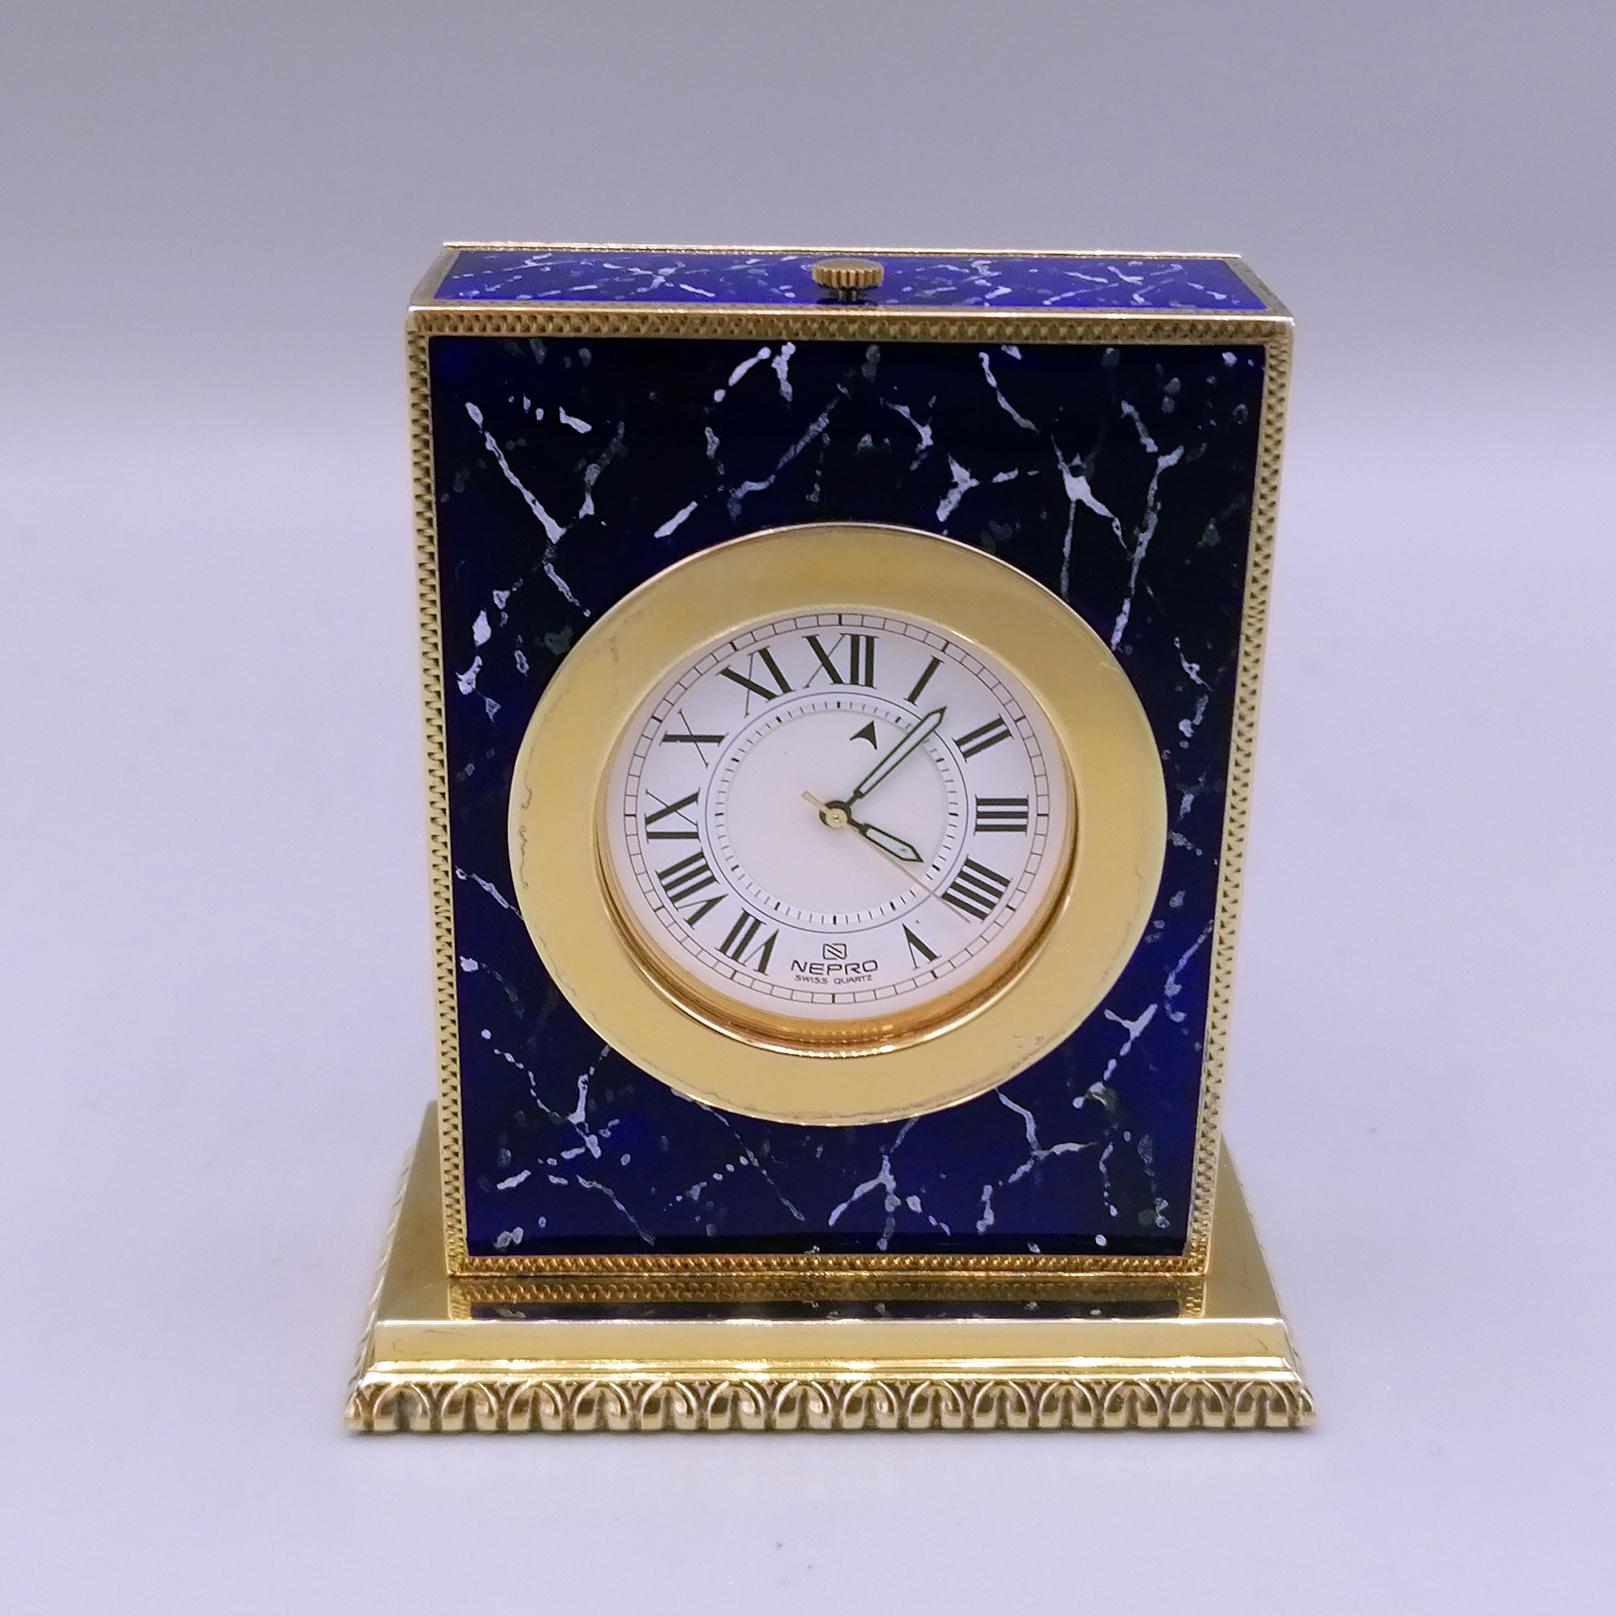 20th century sterling silver table clock 925/1000 with fire enamel painted as lapis lazuli, Swiss quartz movement 